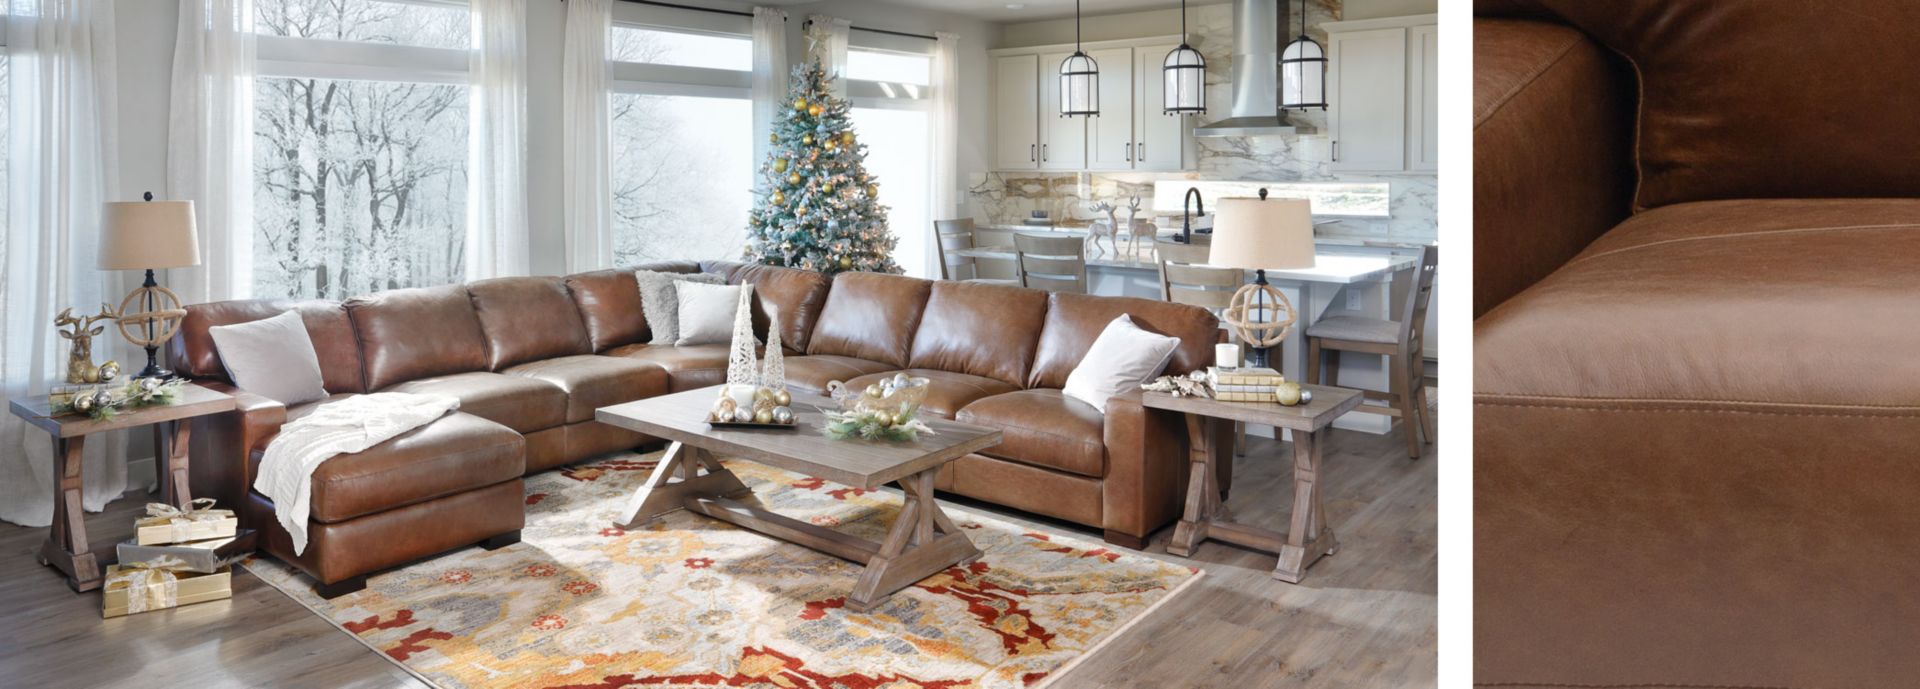 Durango Sofa Holiday Room Shot  with Leather Feature